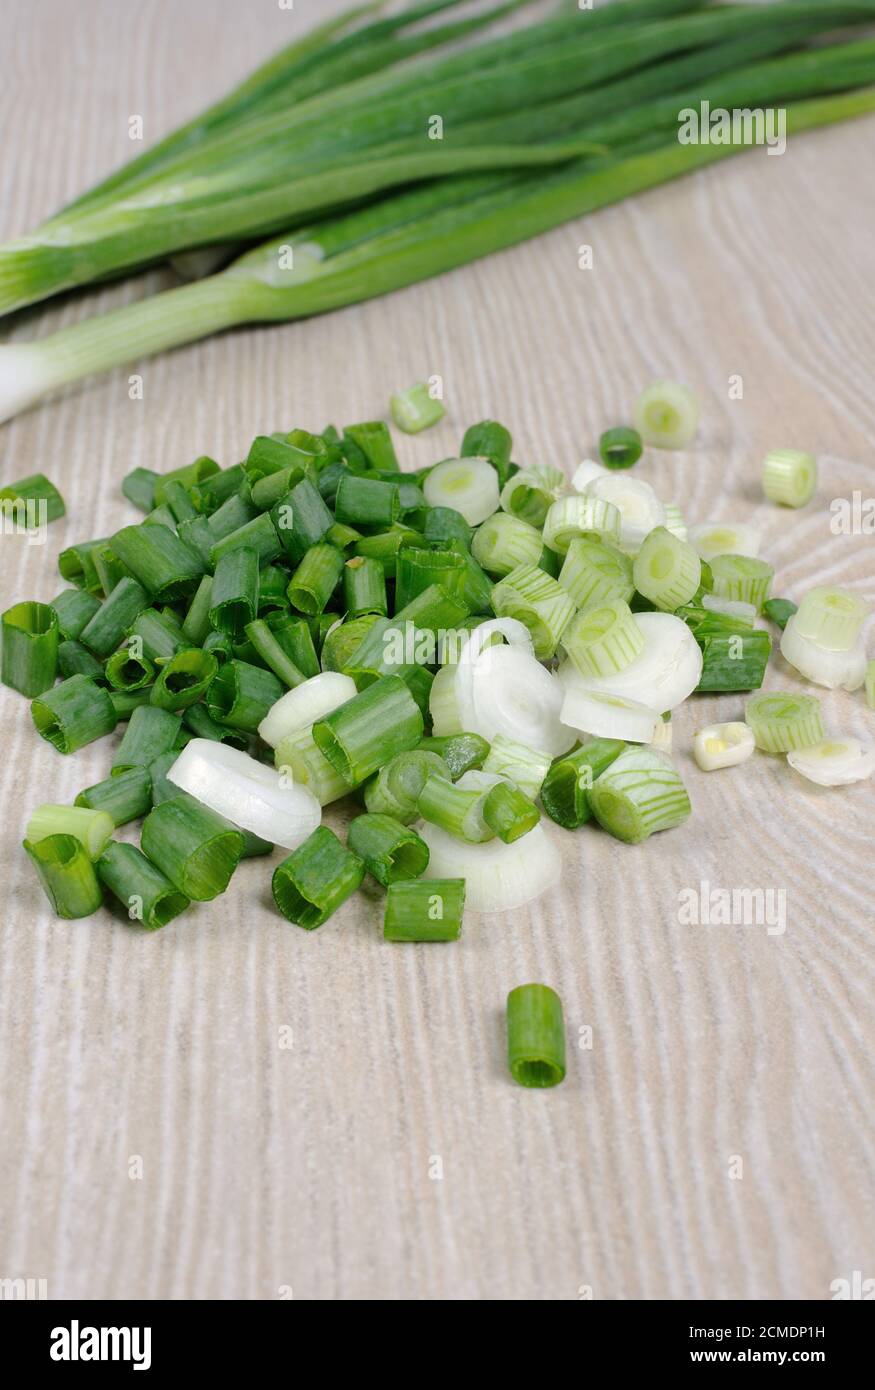 Chopped Herbs - Chives Stock Photo